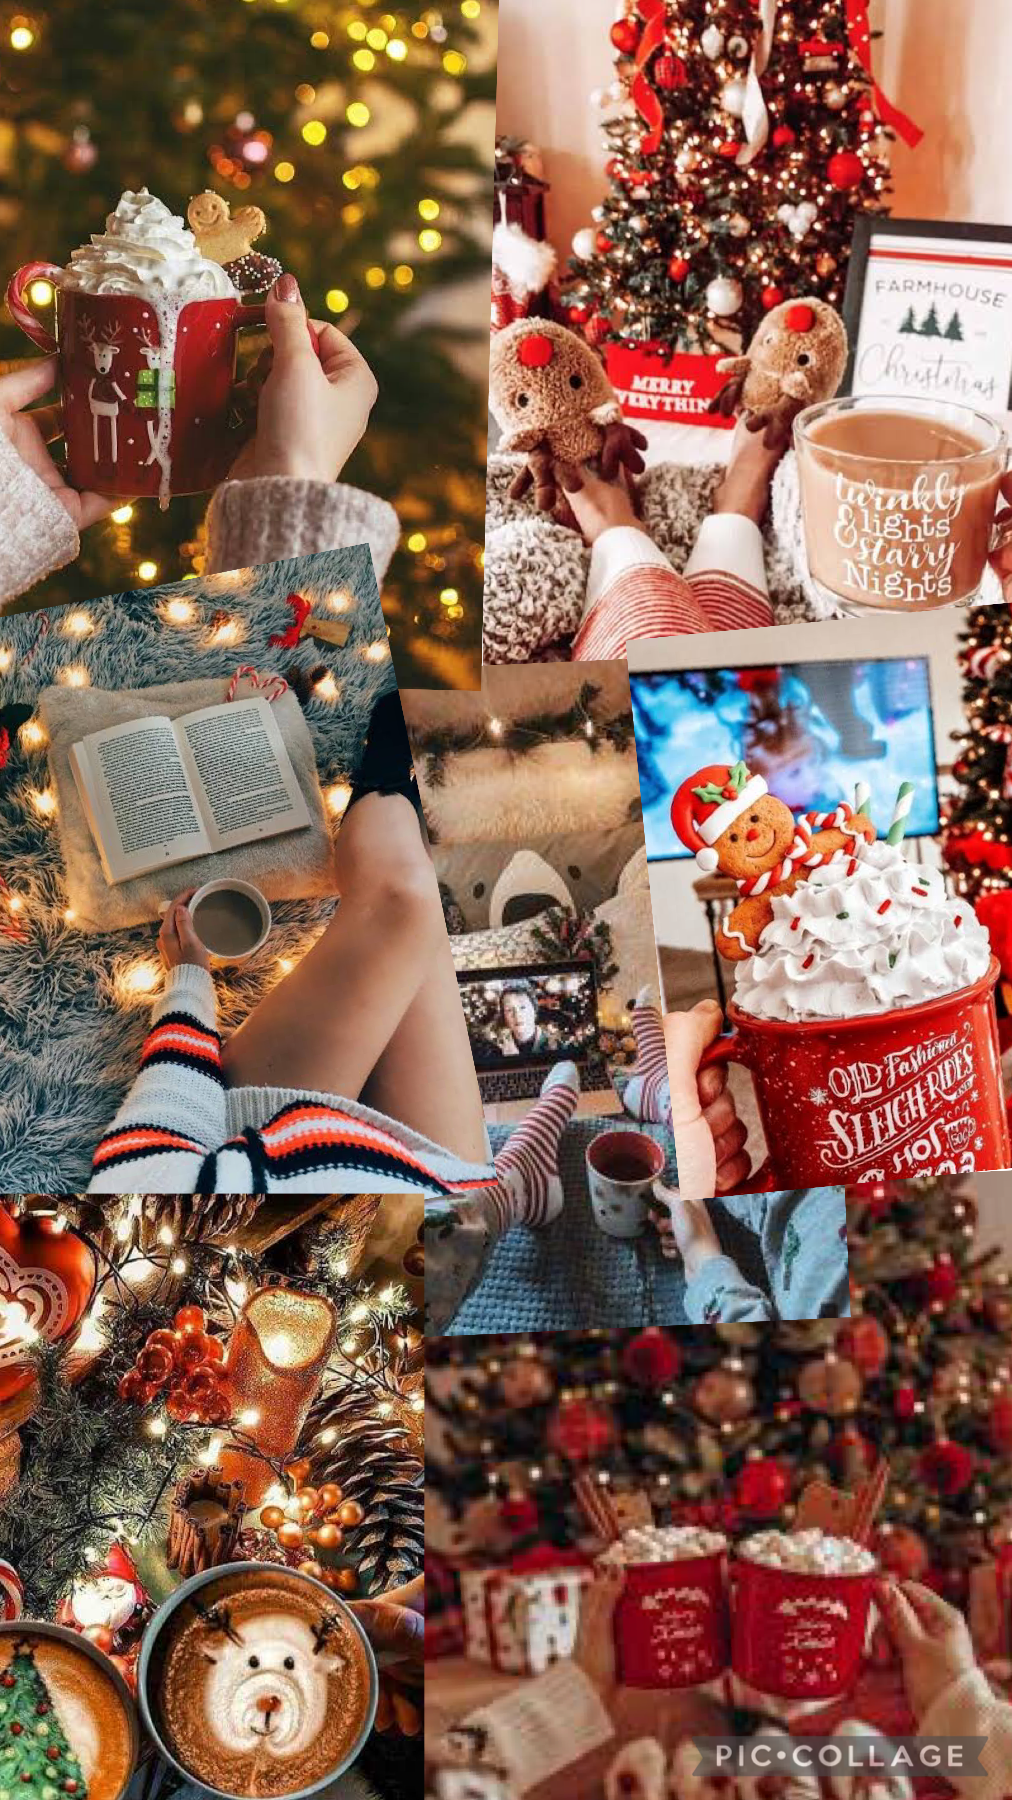 Christmas aesthetic collage ( tap)
yay it’s almost Christmas 🎄😝